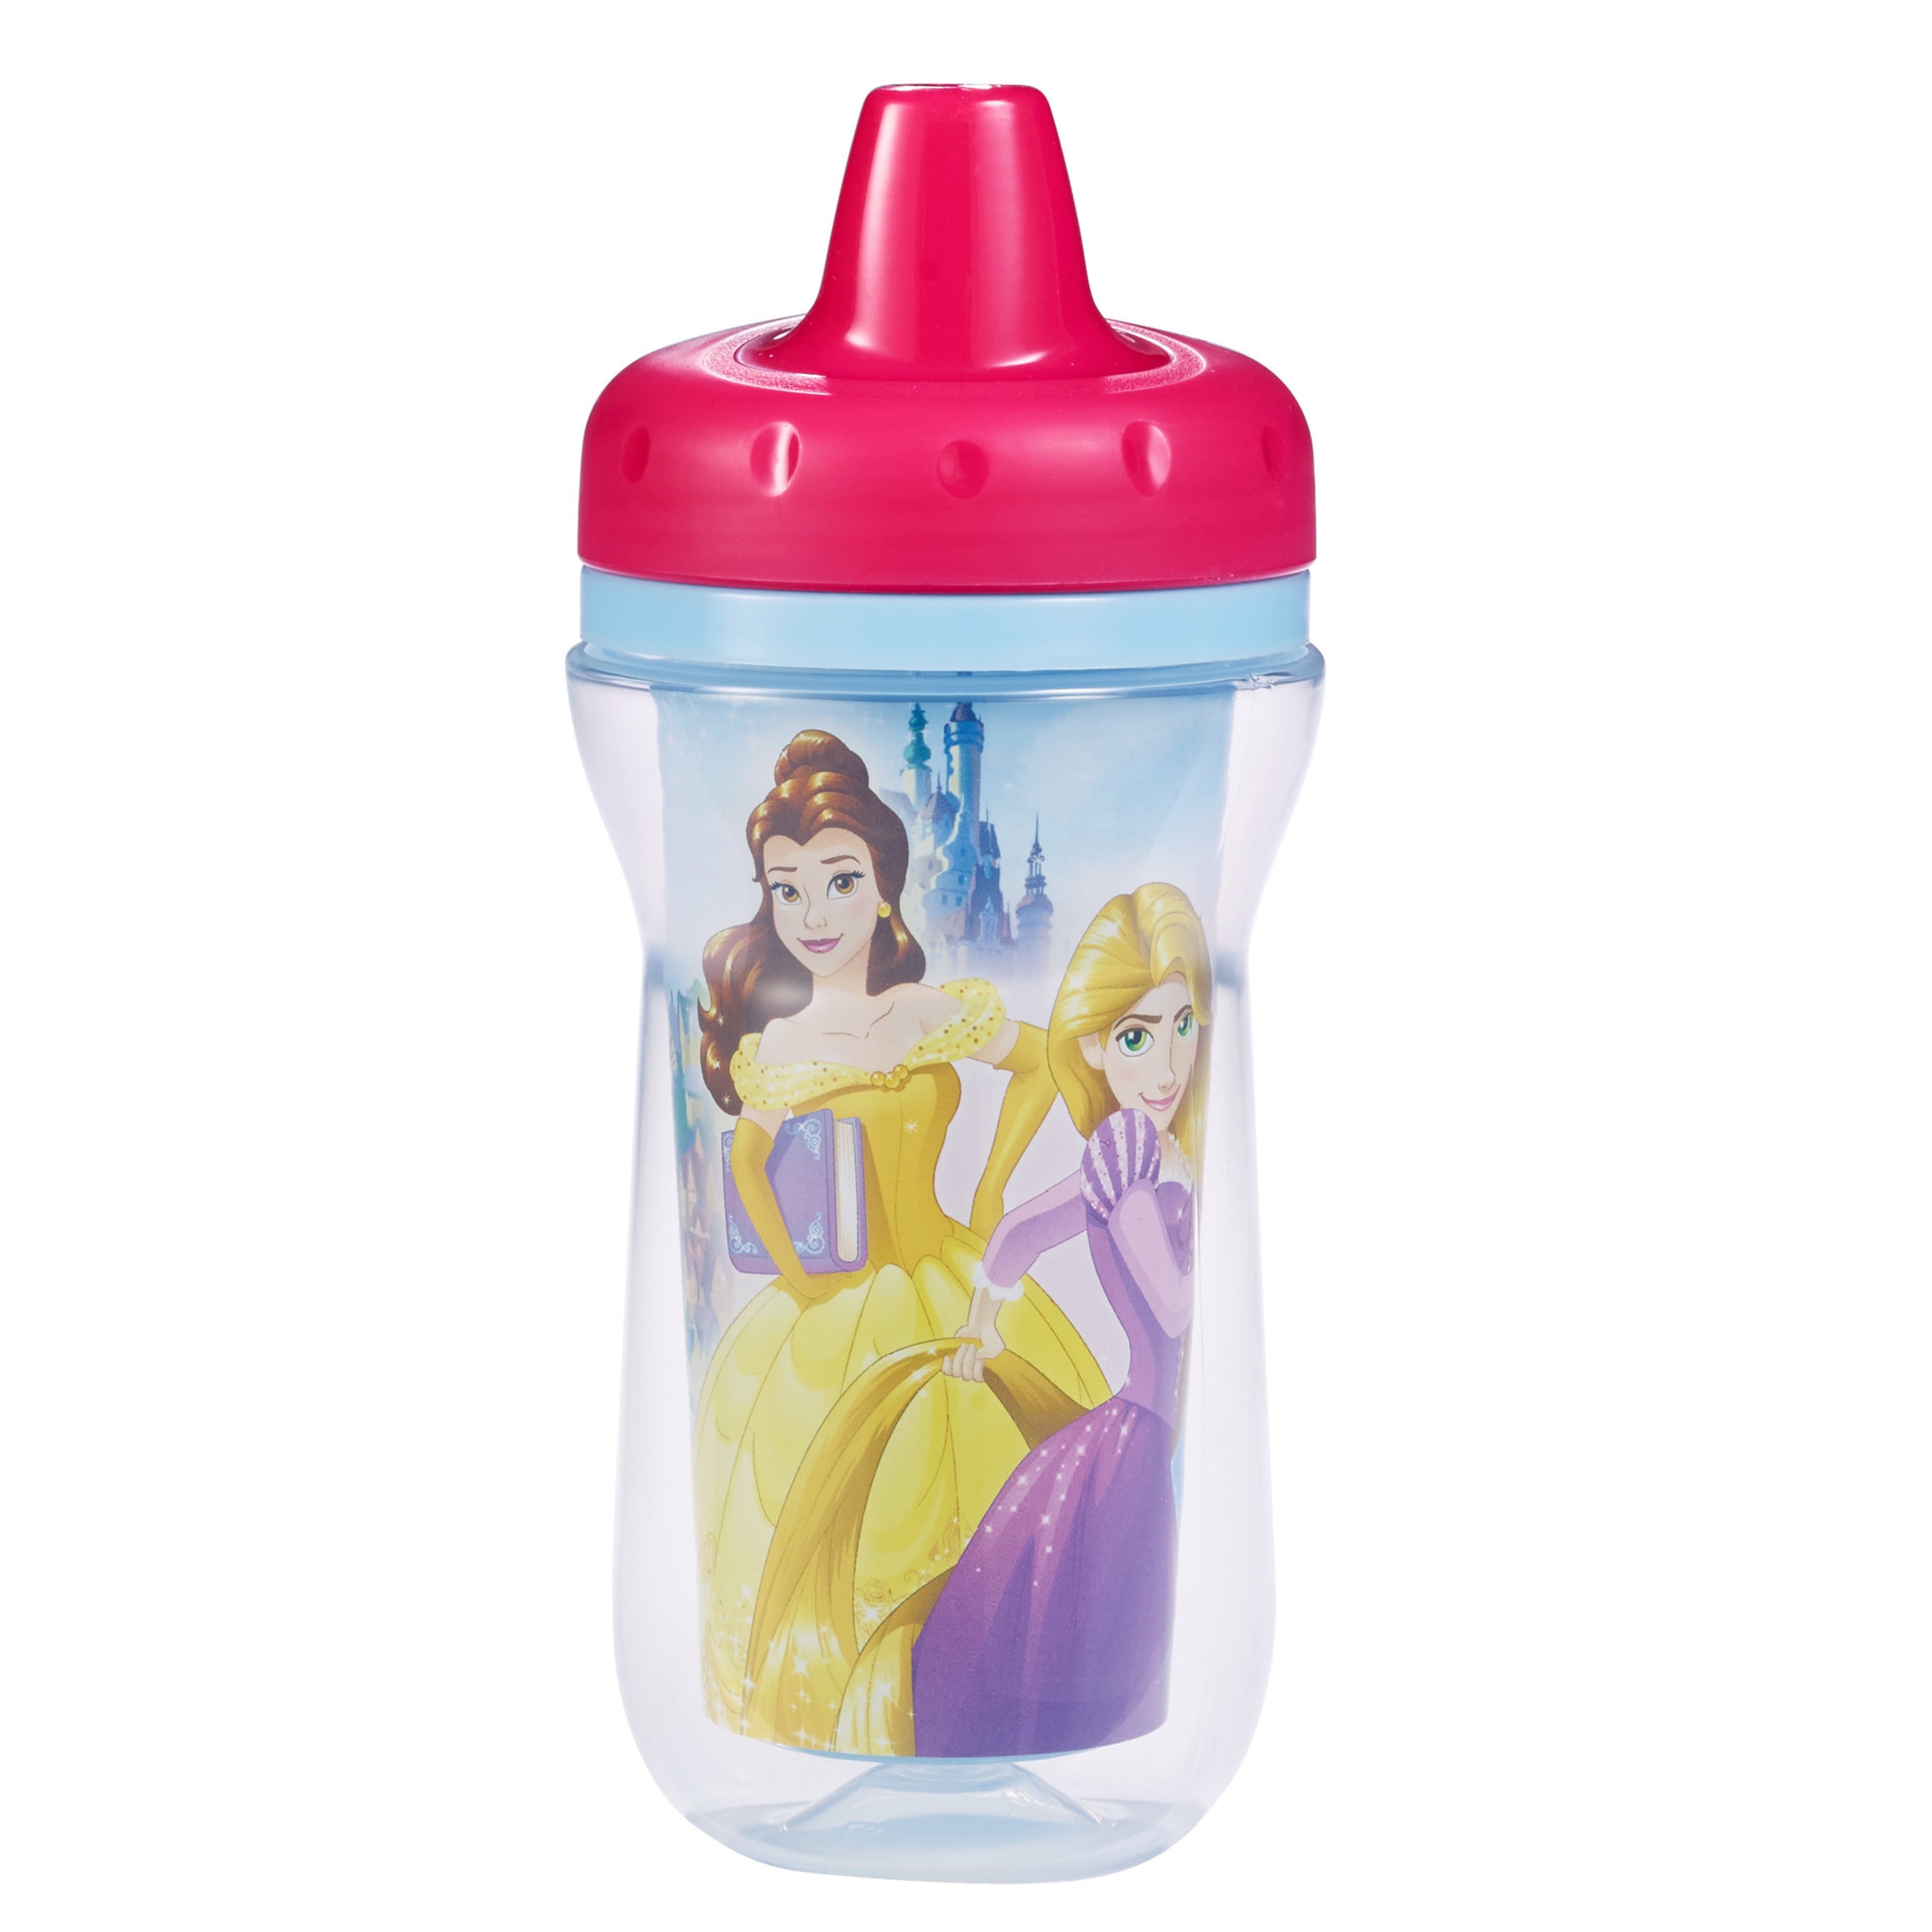 The First Years One Piece Lid Sippy Cups {Review + Contest} - Opera Singer  in the Kitchen